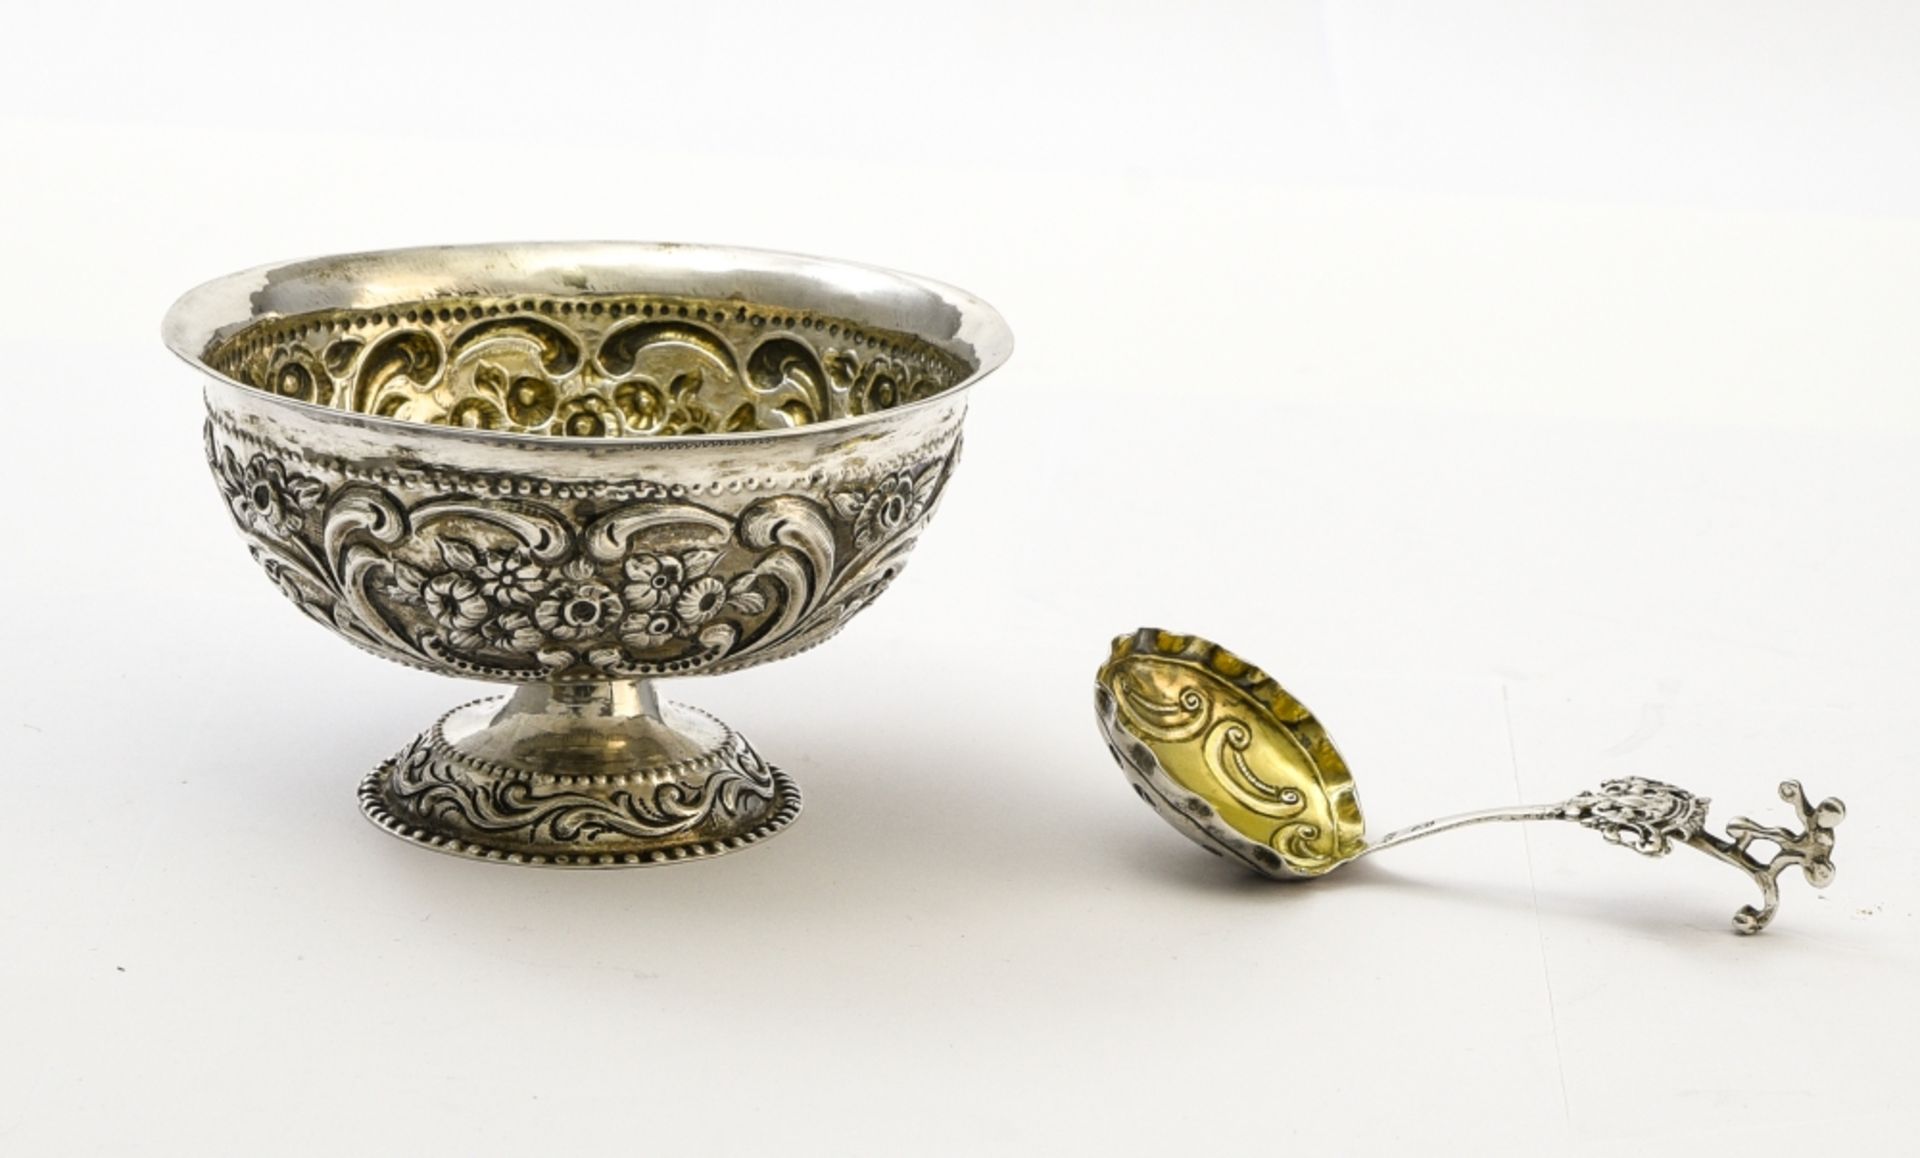 Footed bowl with silver spoon LIKELY 18TH CENTURY Silver with embossed dŽcor of stylised flowers